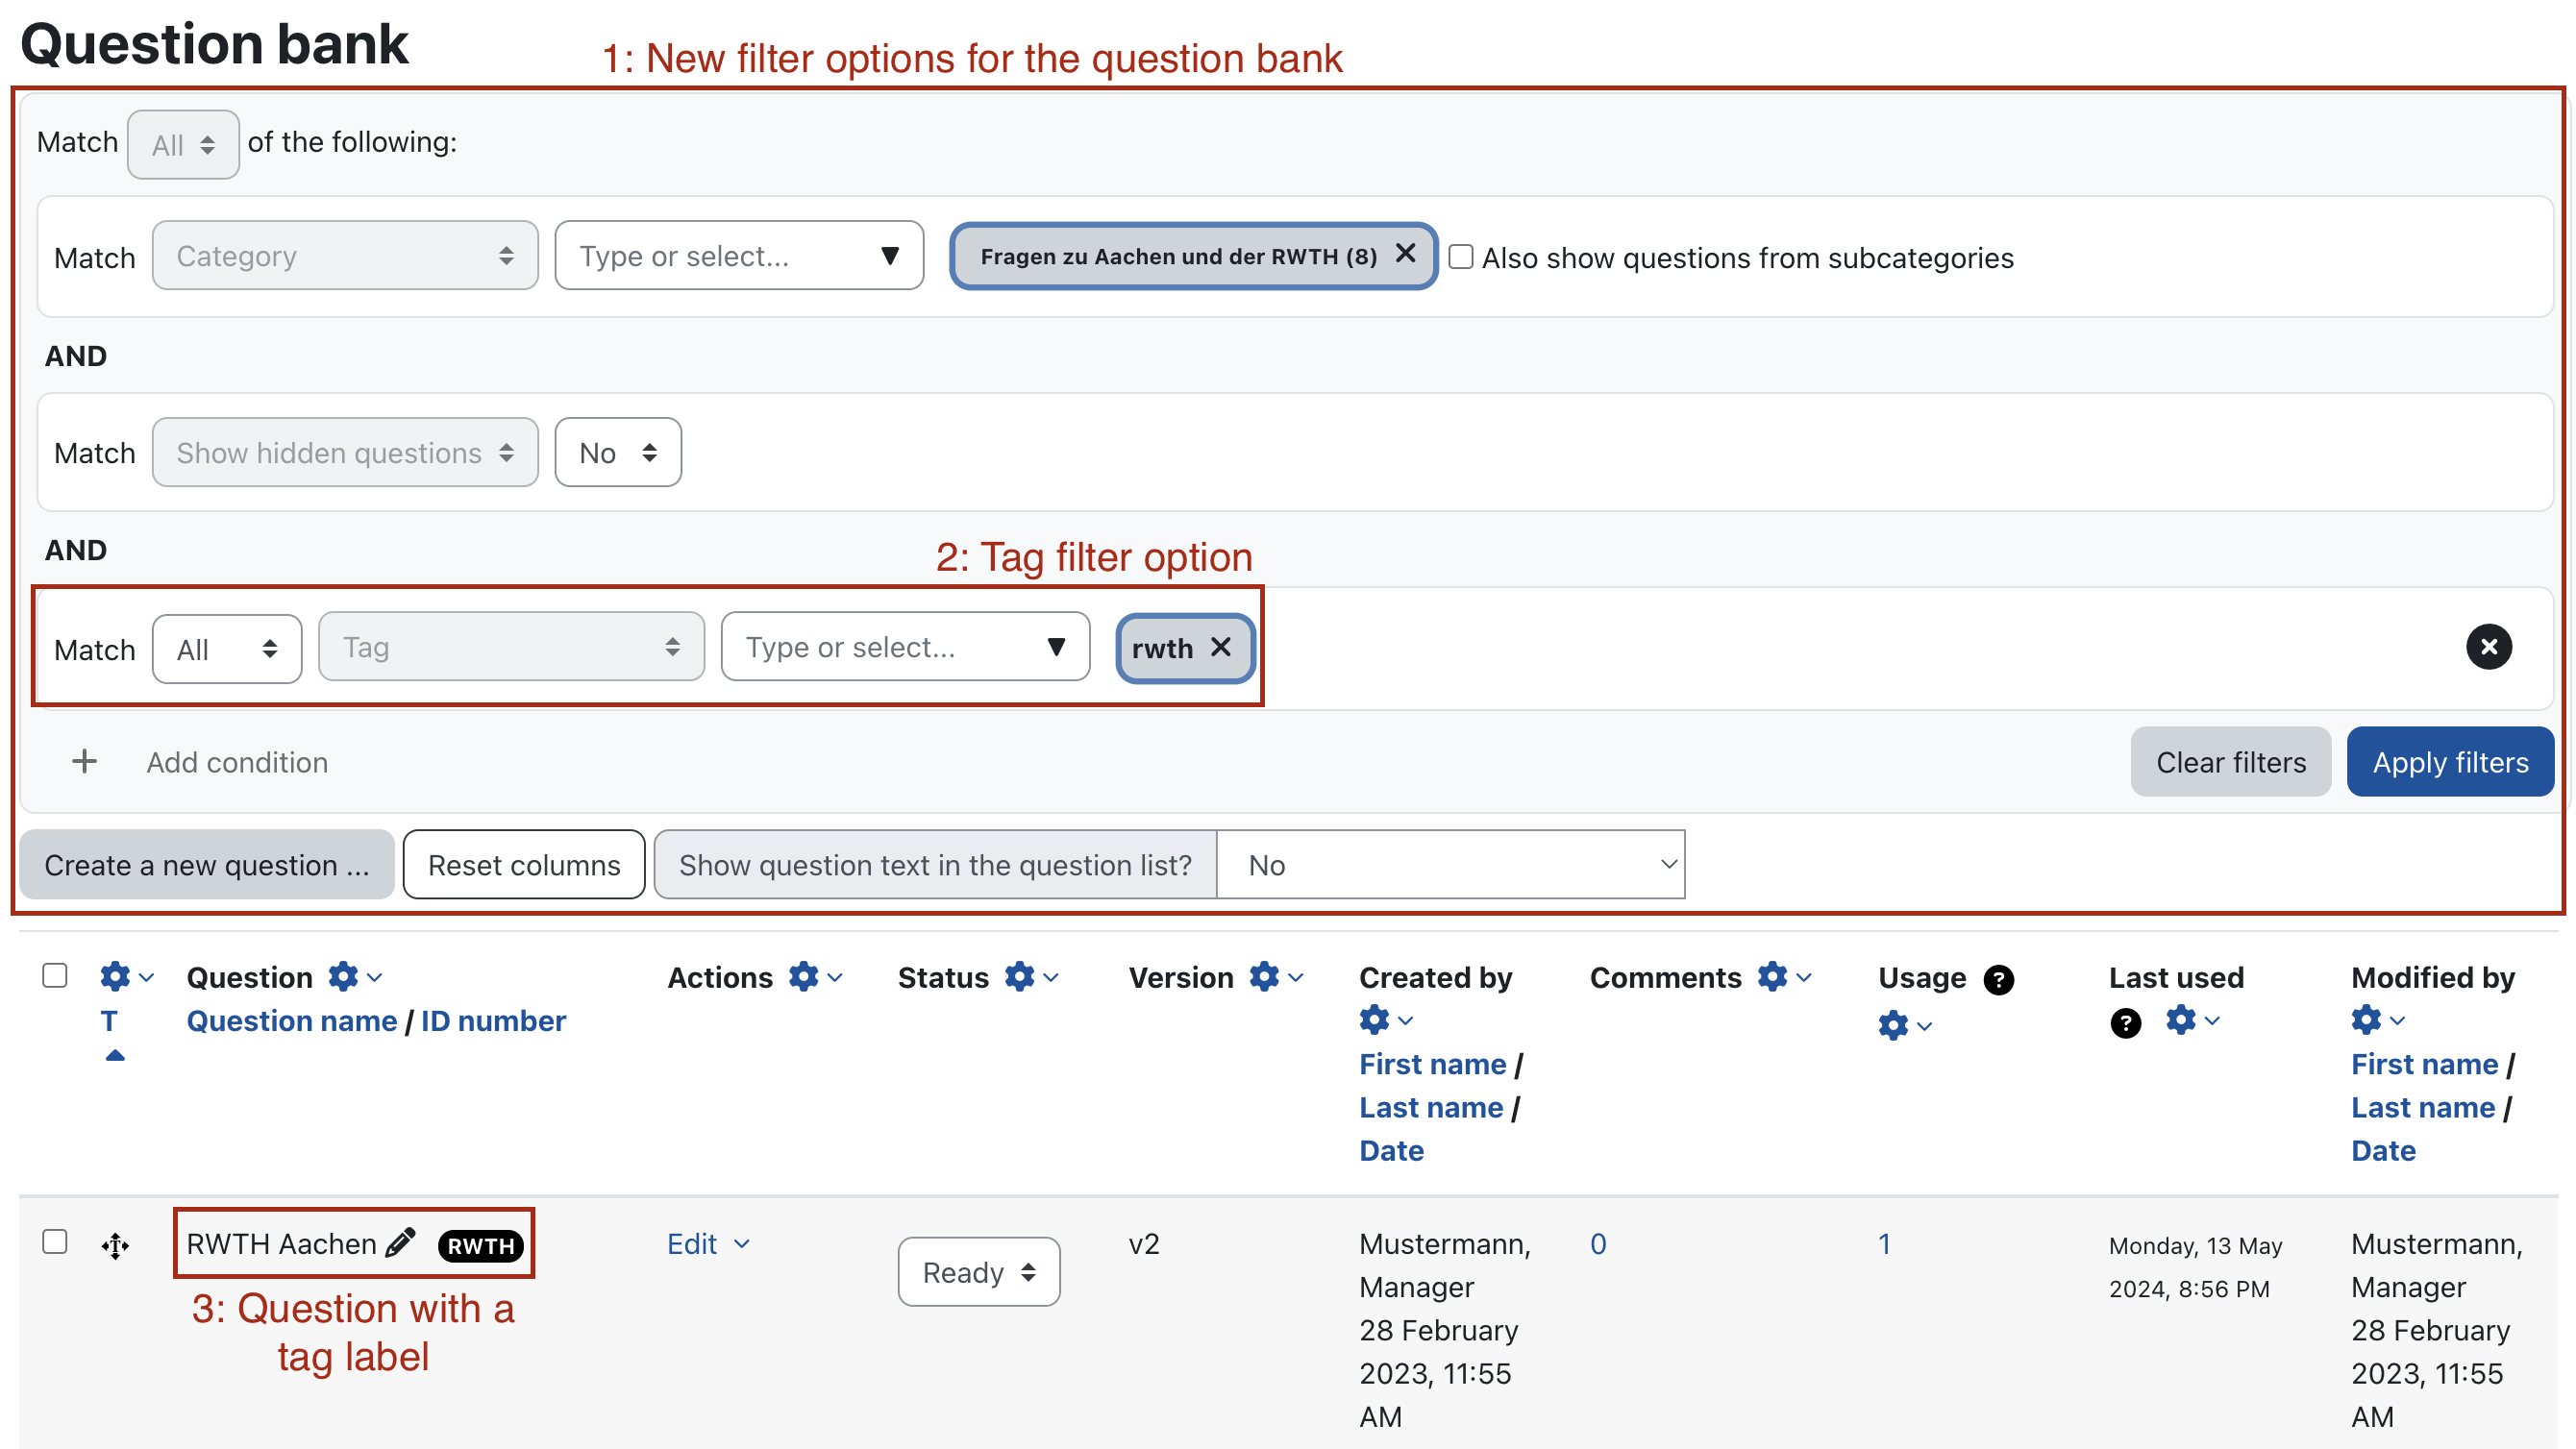 Screenshot of the question bank. In the upper area, the filter with the filter options Category, Show hidden questions and Tag, which can be combined using “and”. In the lower area, a filtered question with the tag label matching the filter